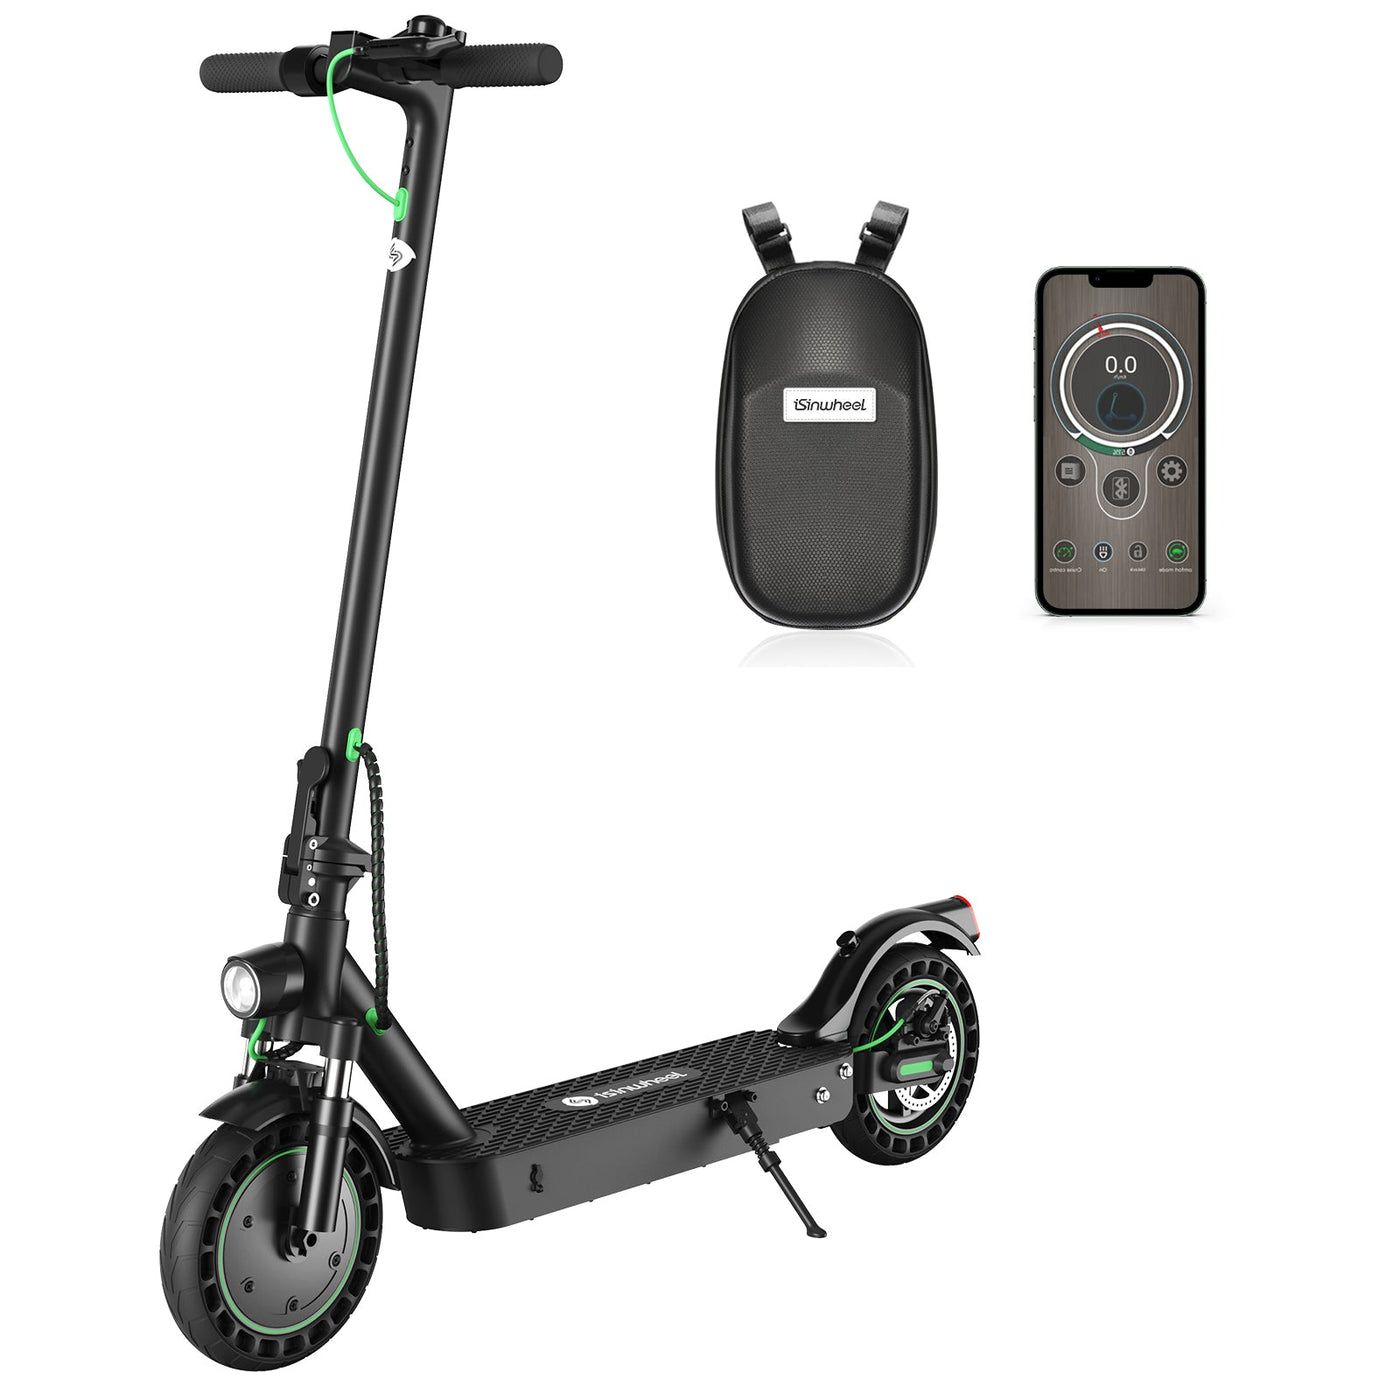 isinwheel s9max electric scooter with bluetooth